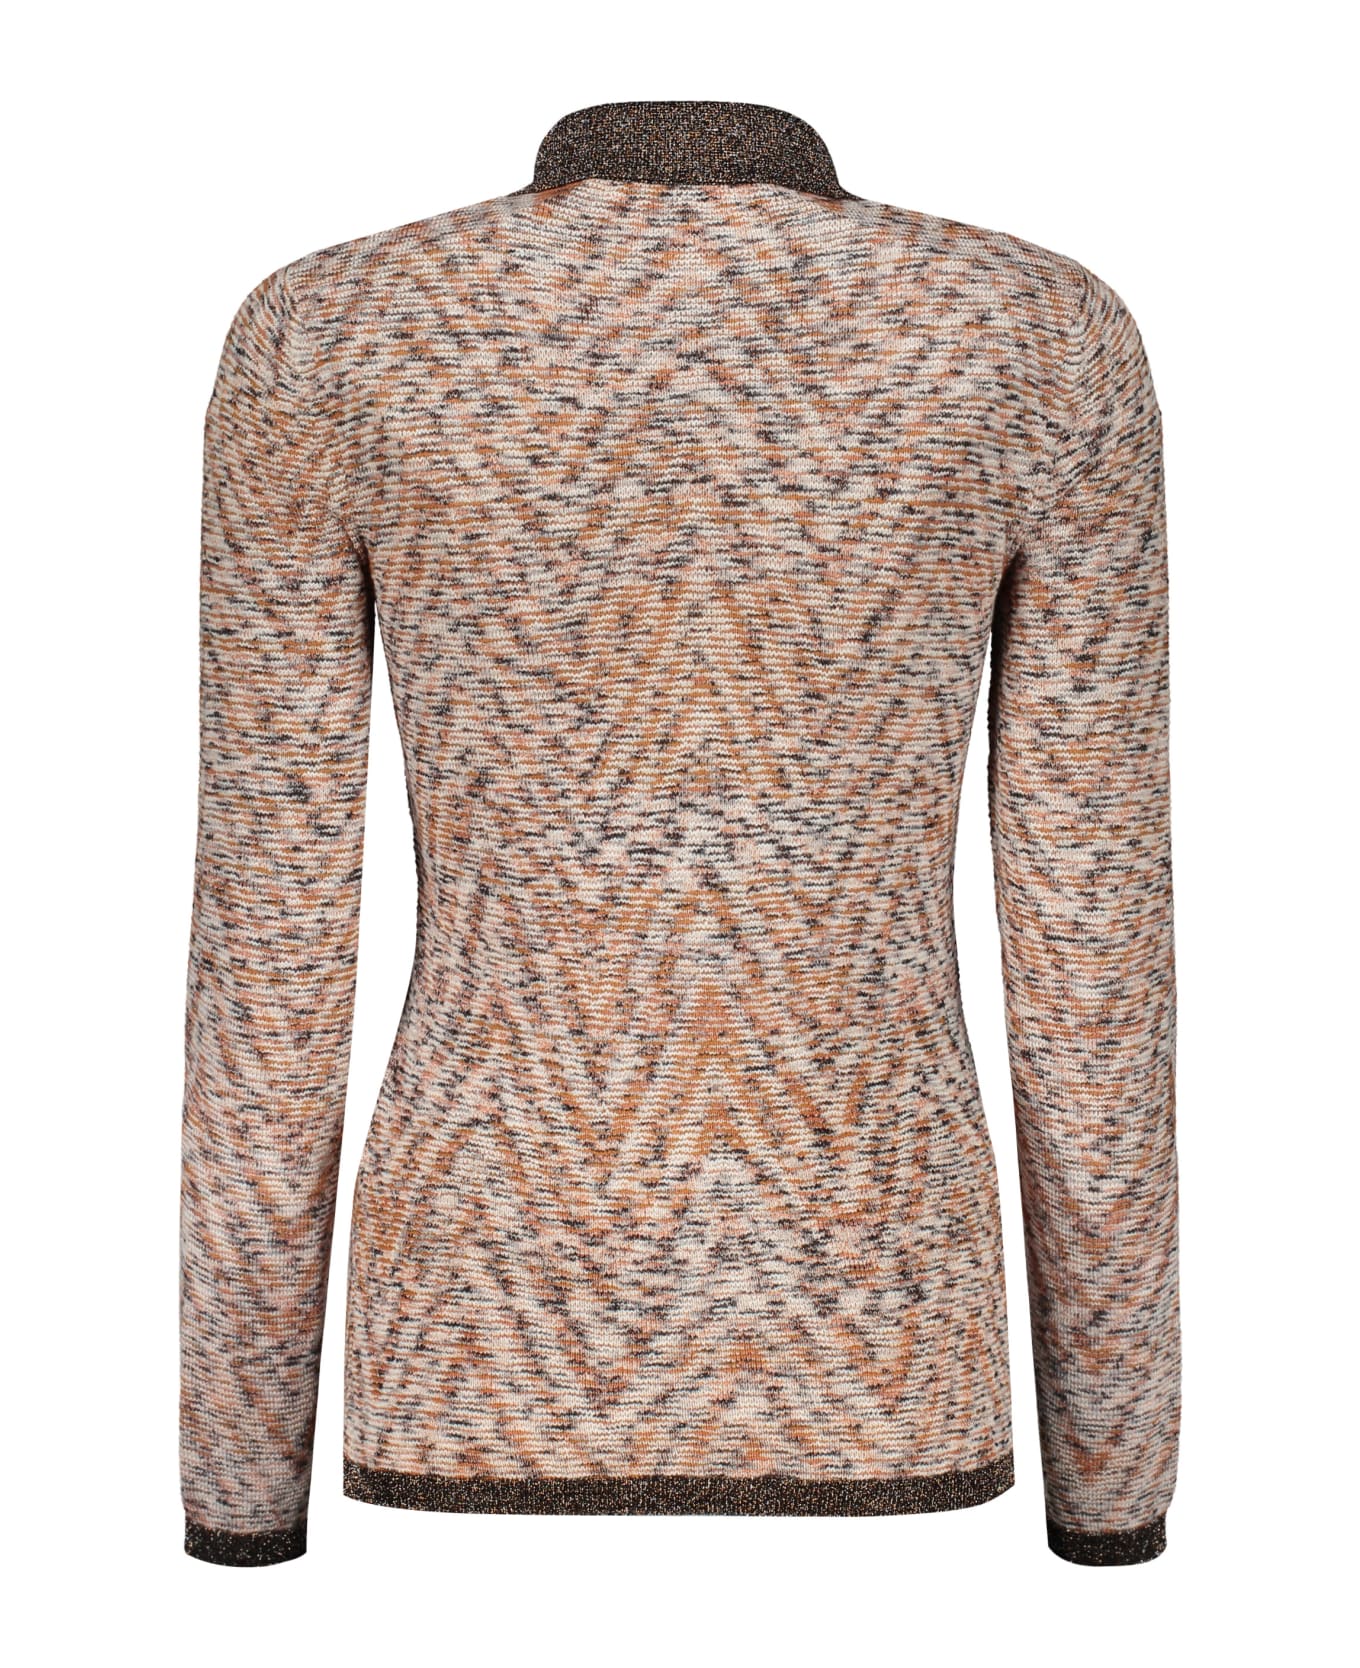 Missoni Knitted Wool Polo Shirt - brown